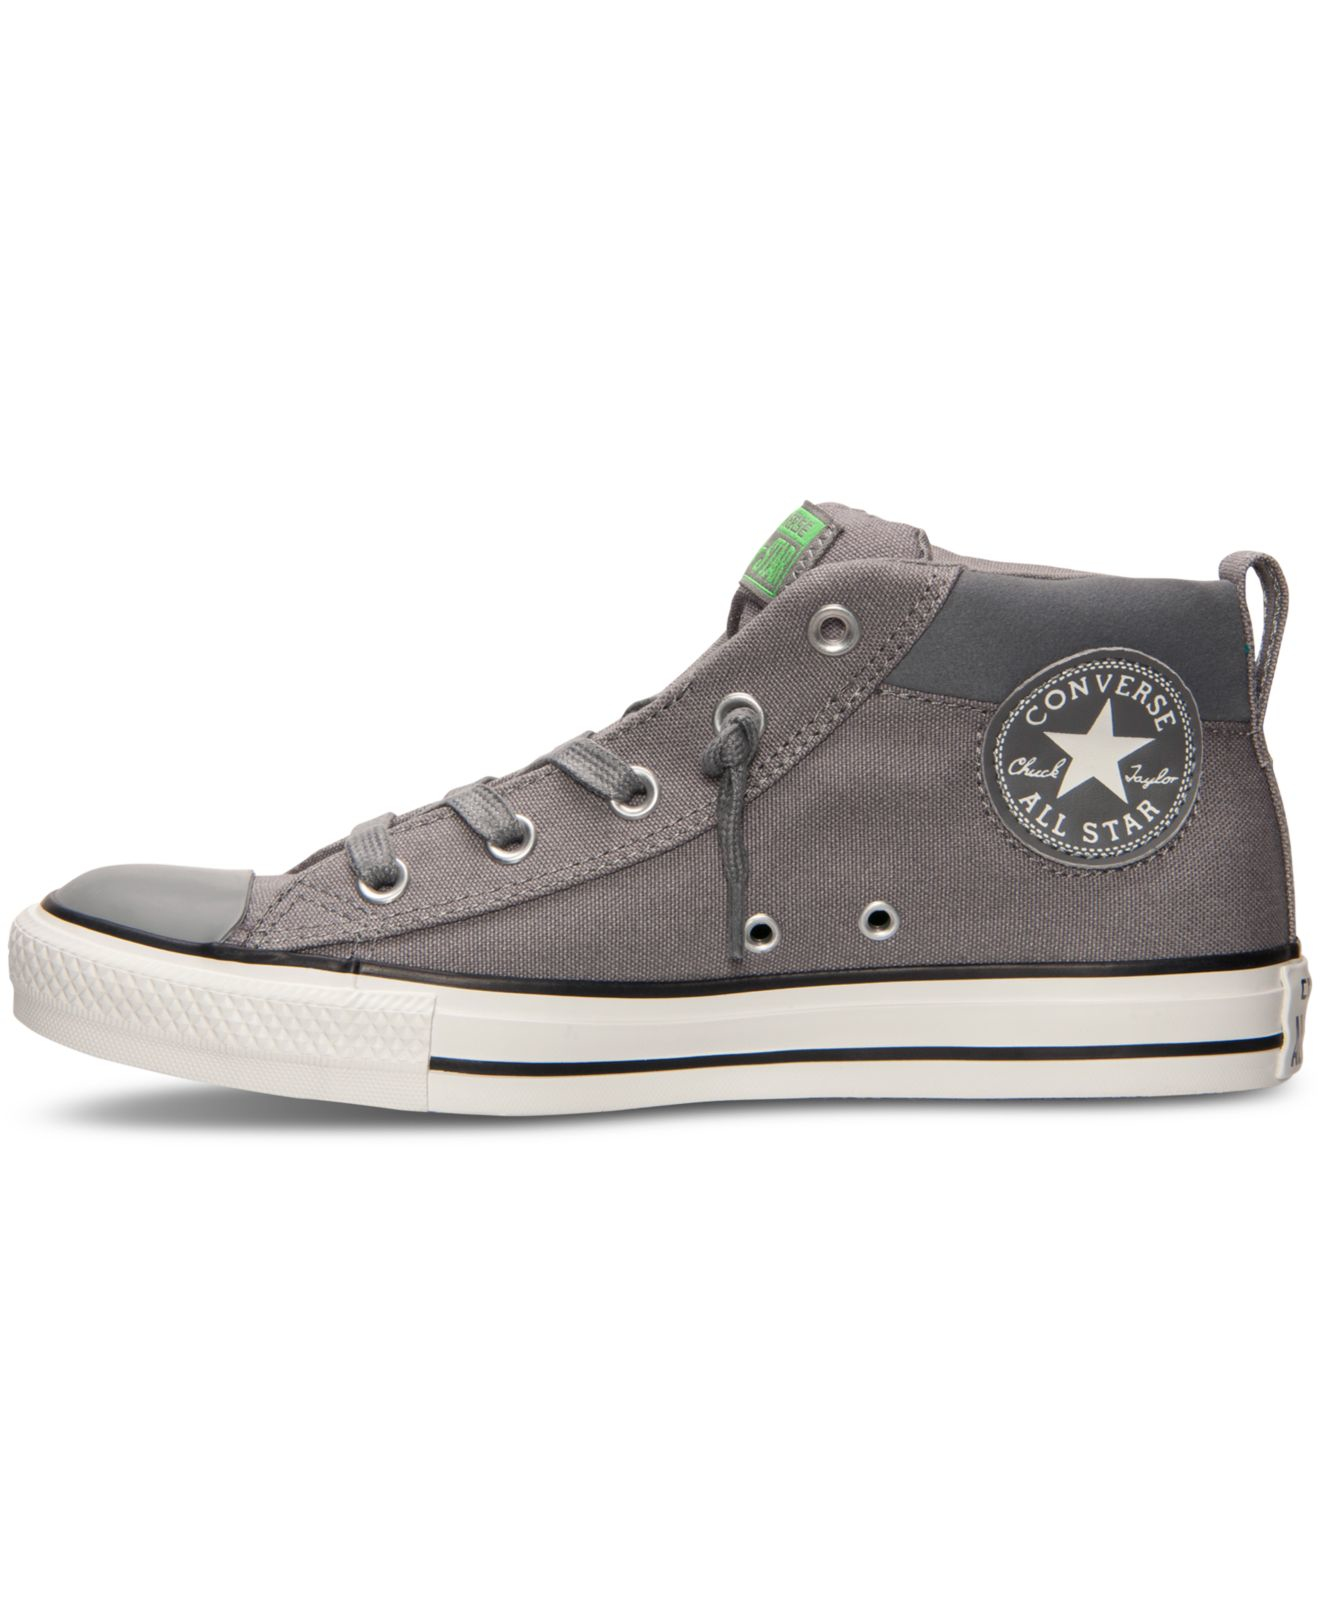 Converse Men's Chuck Taylor Street Mid Casual Sneakers From Finish Line ...